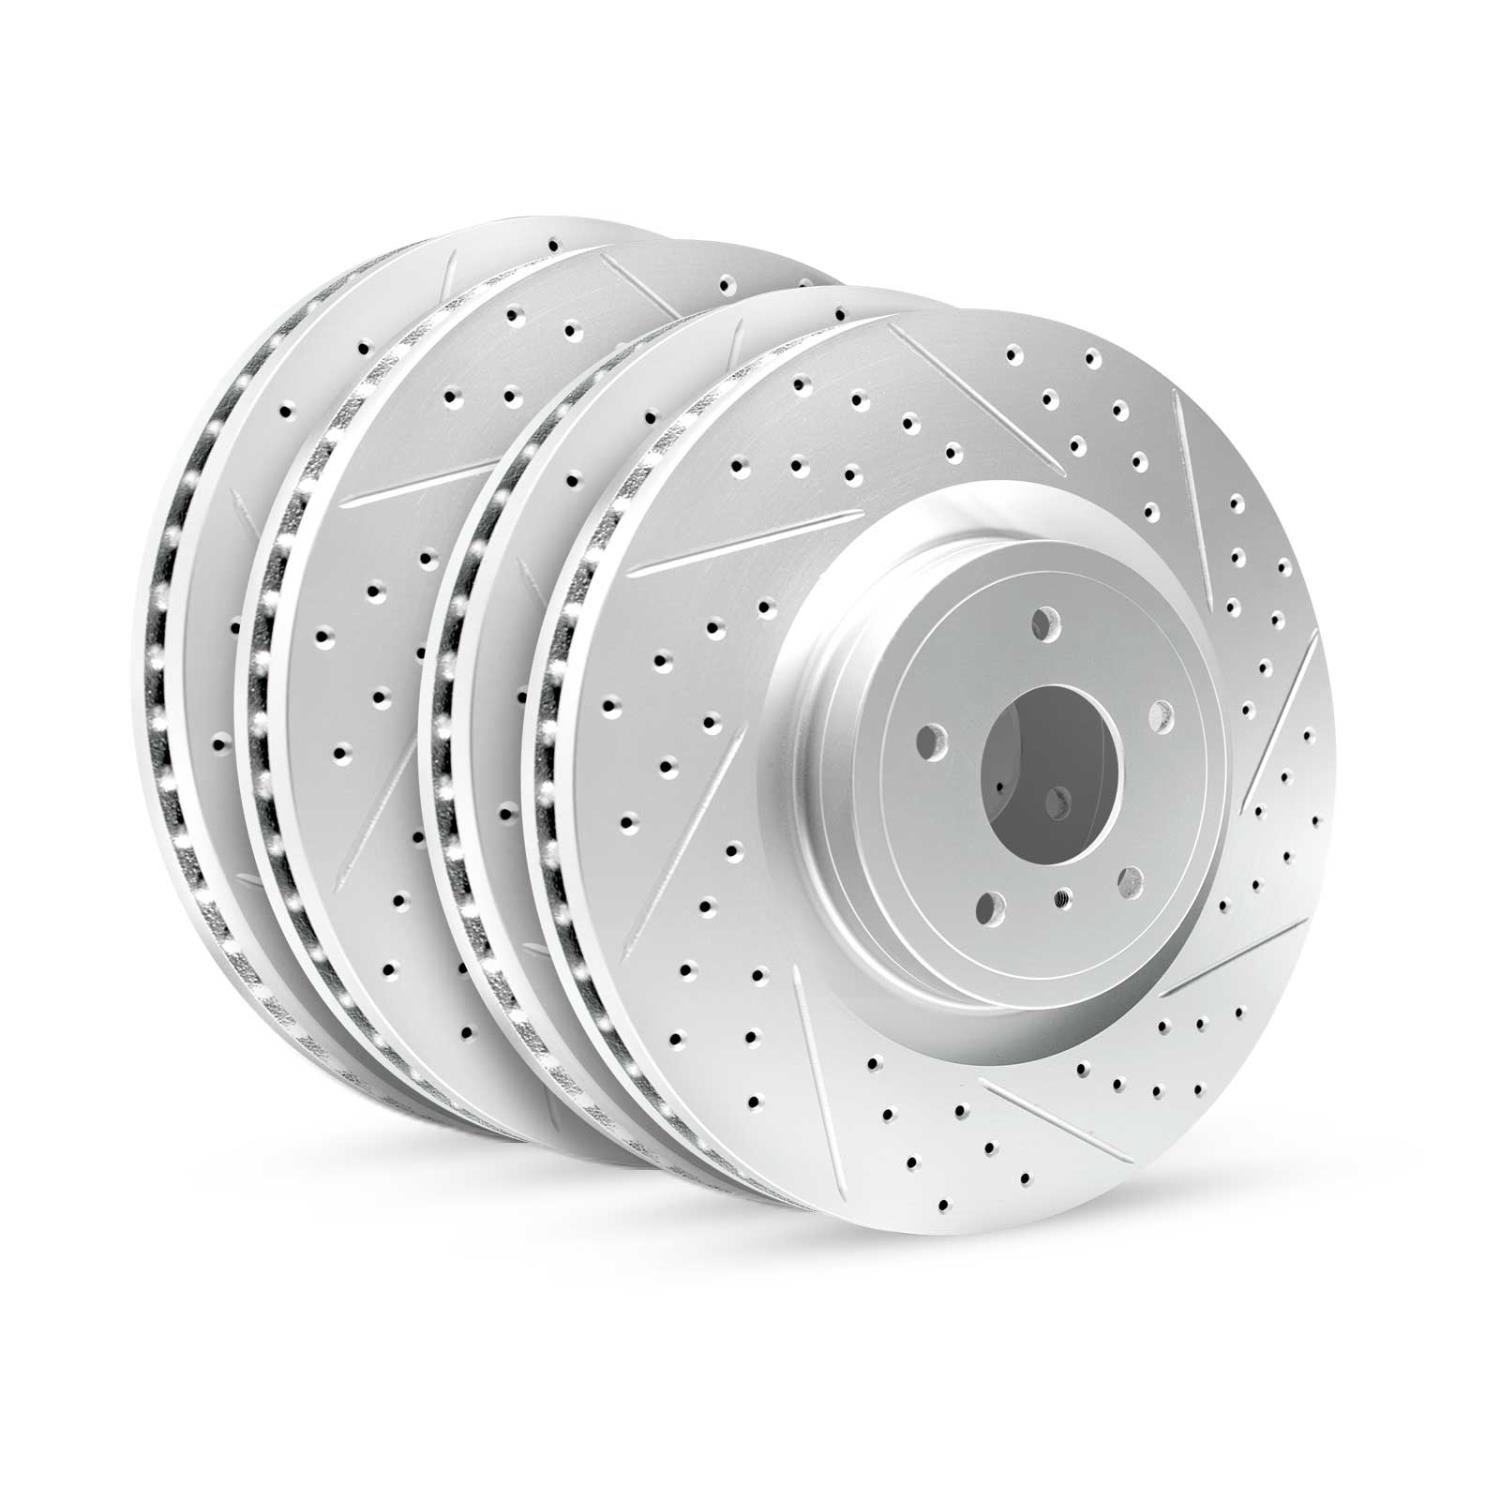 GEO-Carbon Drilled/Slotted Rotors, 1996-2007 Fits Multiple